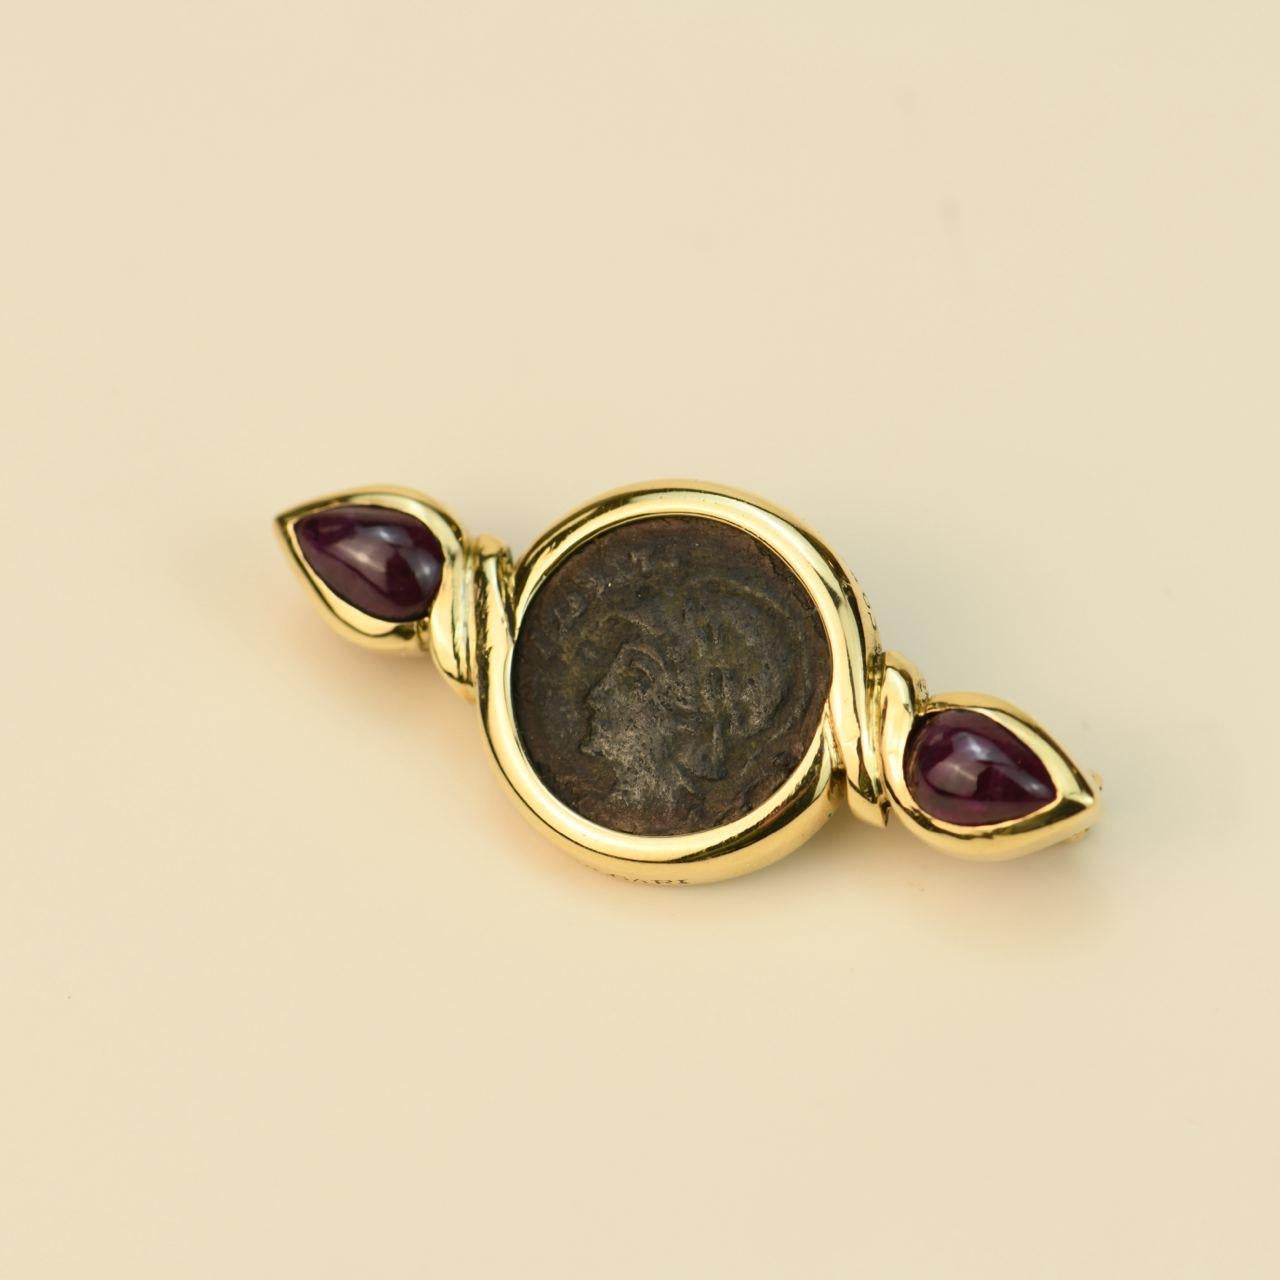 Uncut Bvlgari Monete Ruby 18K Yellow Gold Ancient Coin Brooch For Sale